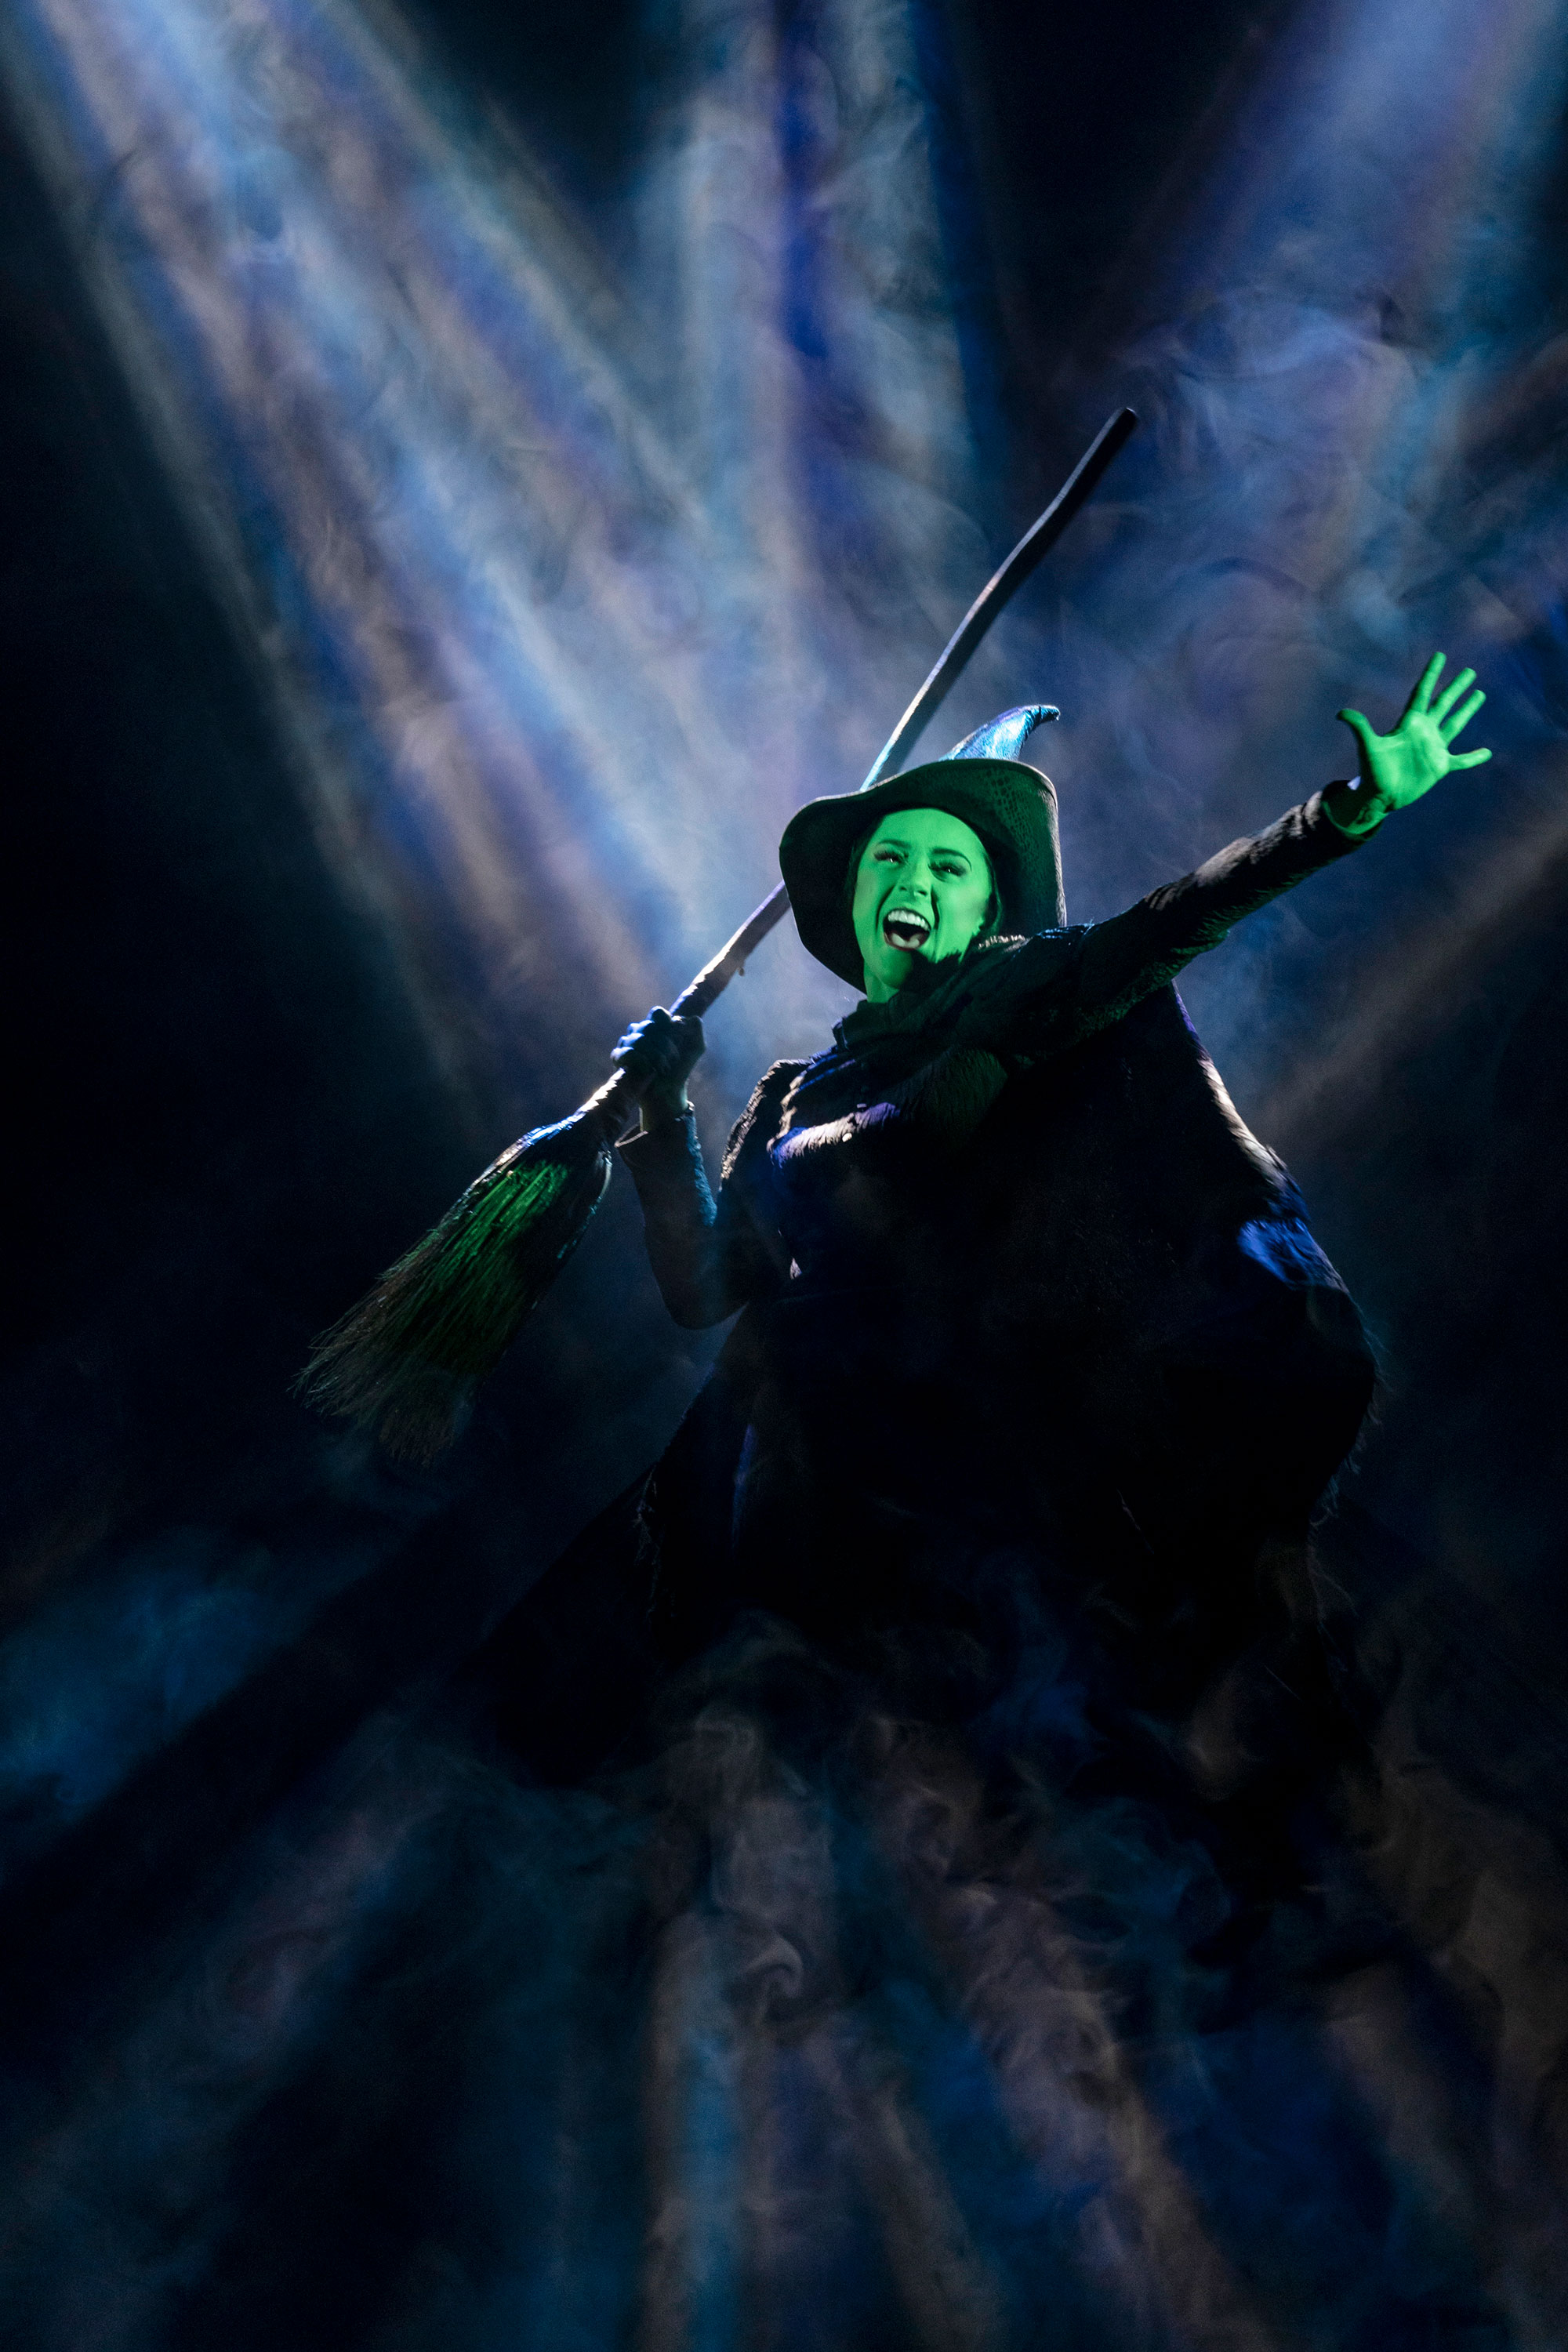 A woman dressed as a witch with a green face and hands holding a broom.